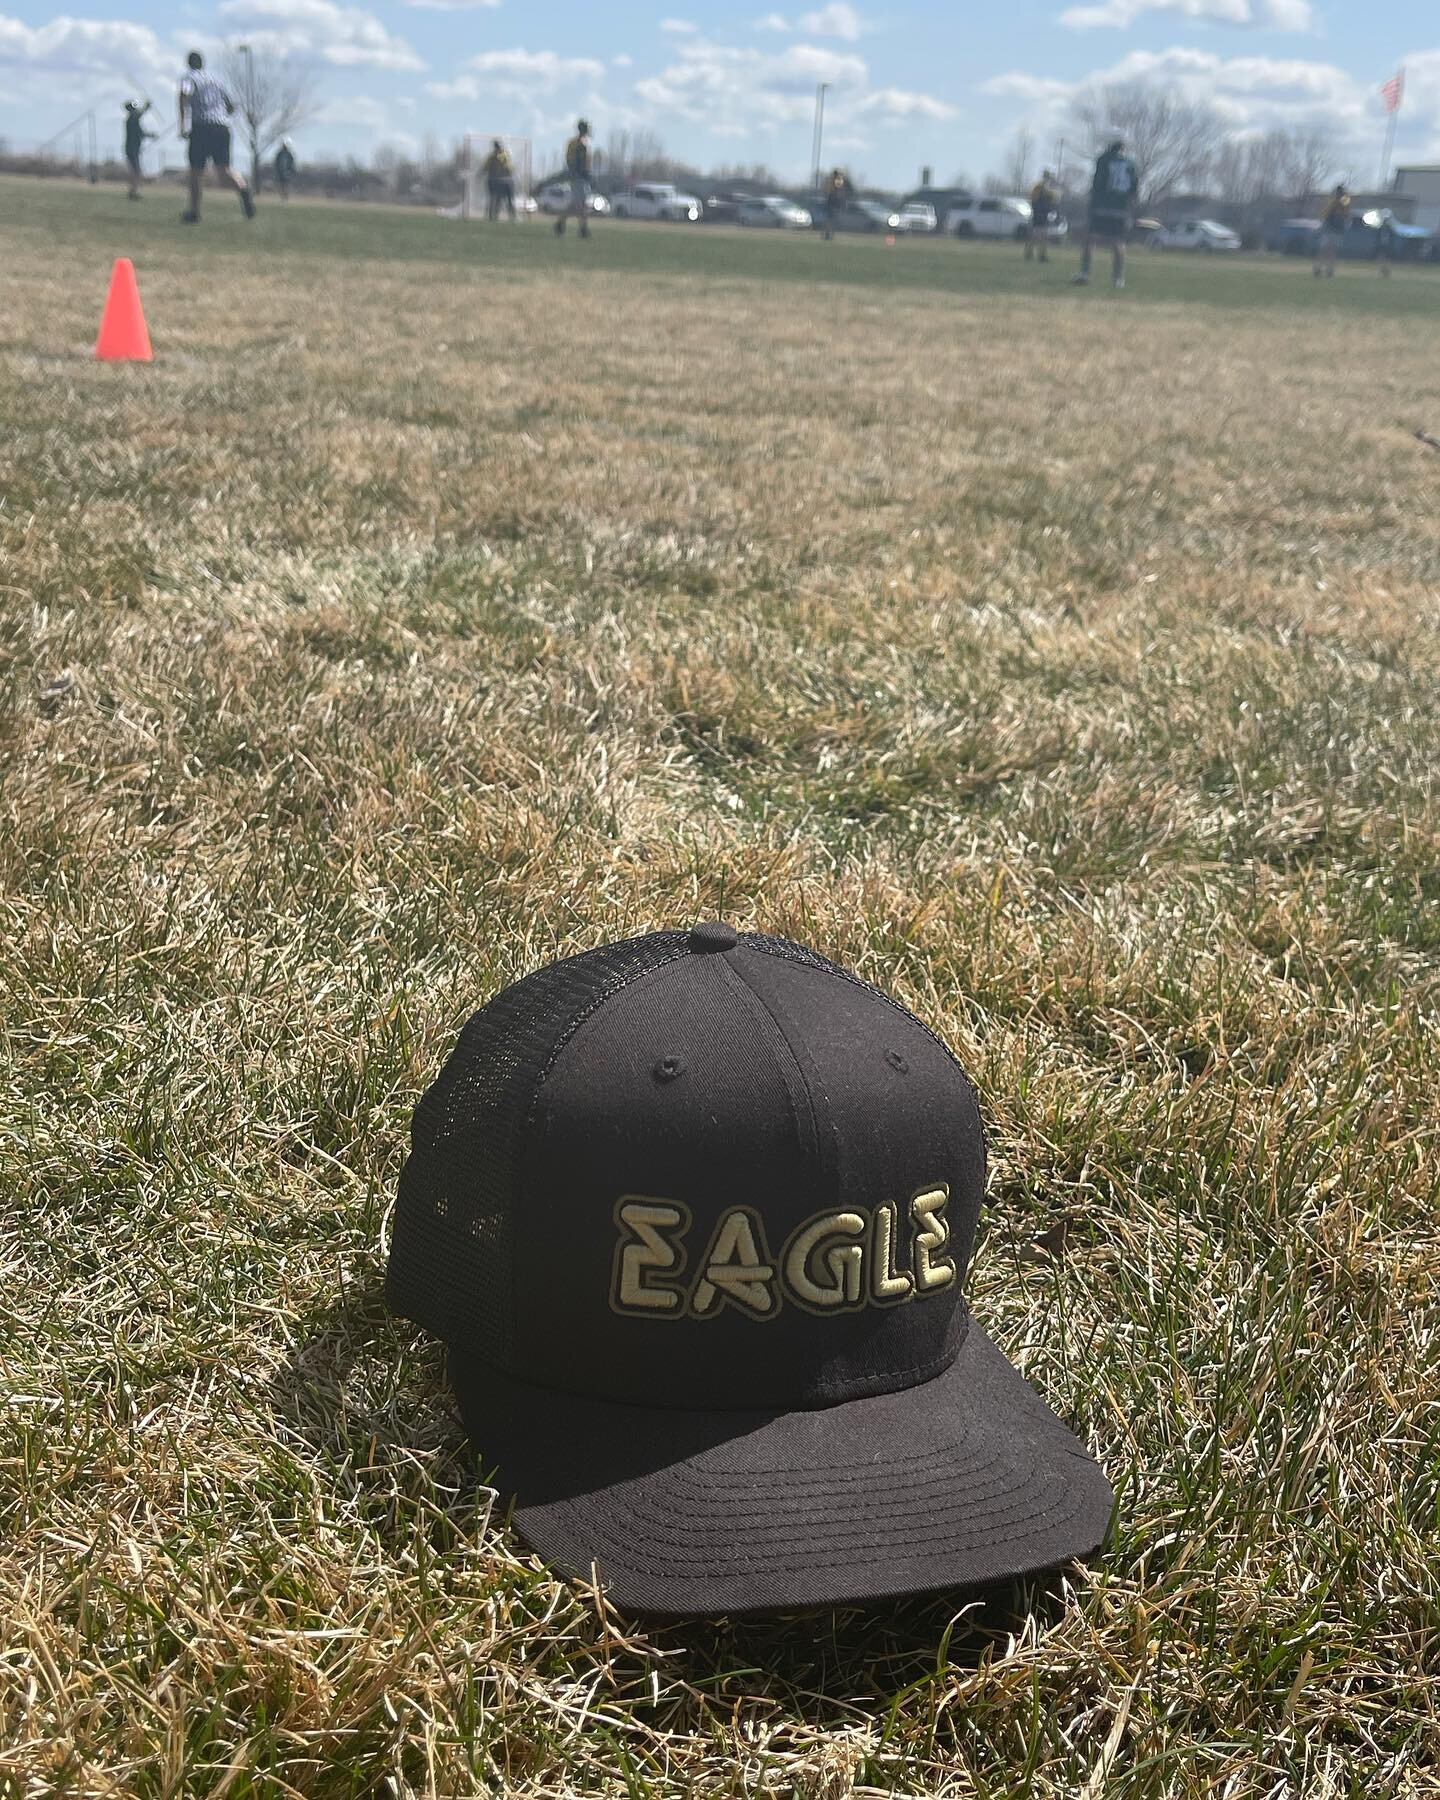 The Eagle Has Landed And There Are Only A Few Left!! #allraddays $10 of the purchase goes to the @ems_lacrosse Team!!! #gomustangs #lacrosse #eagle #eagleidaho #eaglemiddleschool #supportlocal #limited #stayrad